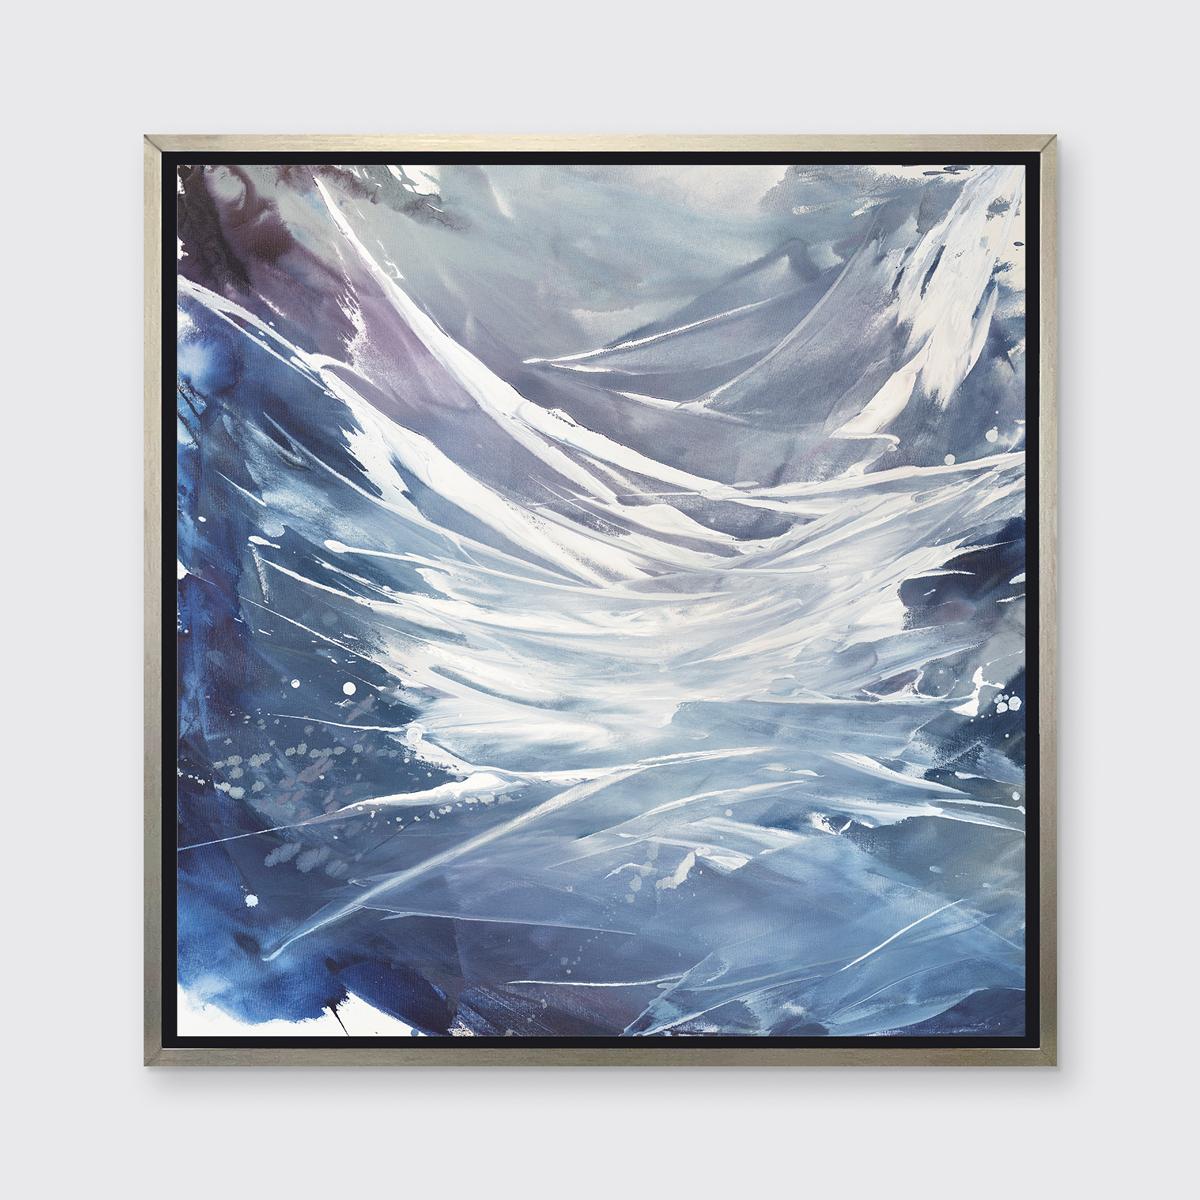 Teodora Guererra Abstract Print - "Fragments, " Framed Limited Edition Giclee Print, 30" x 30"